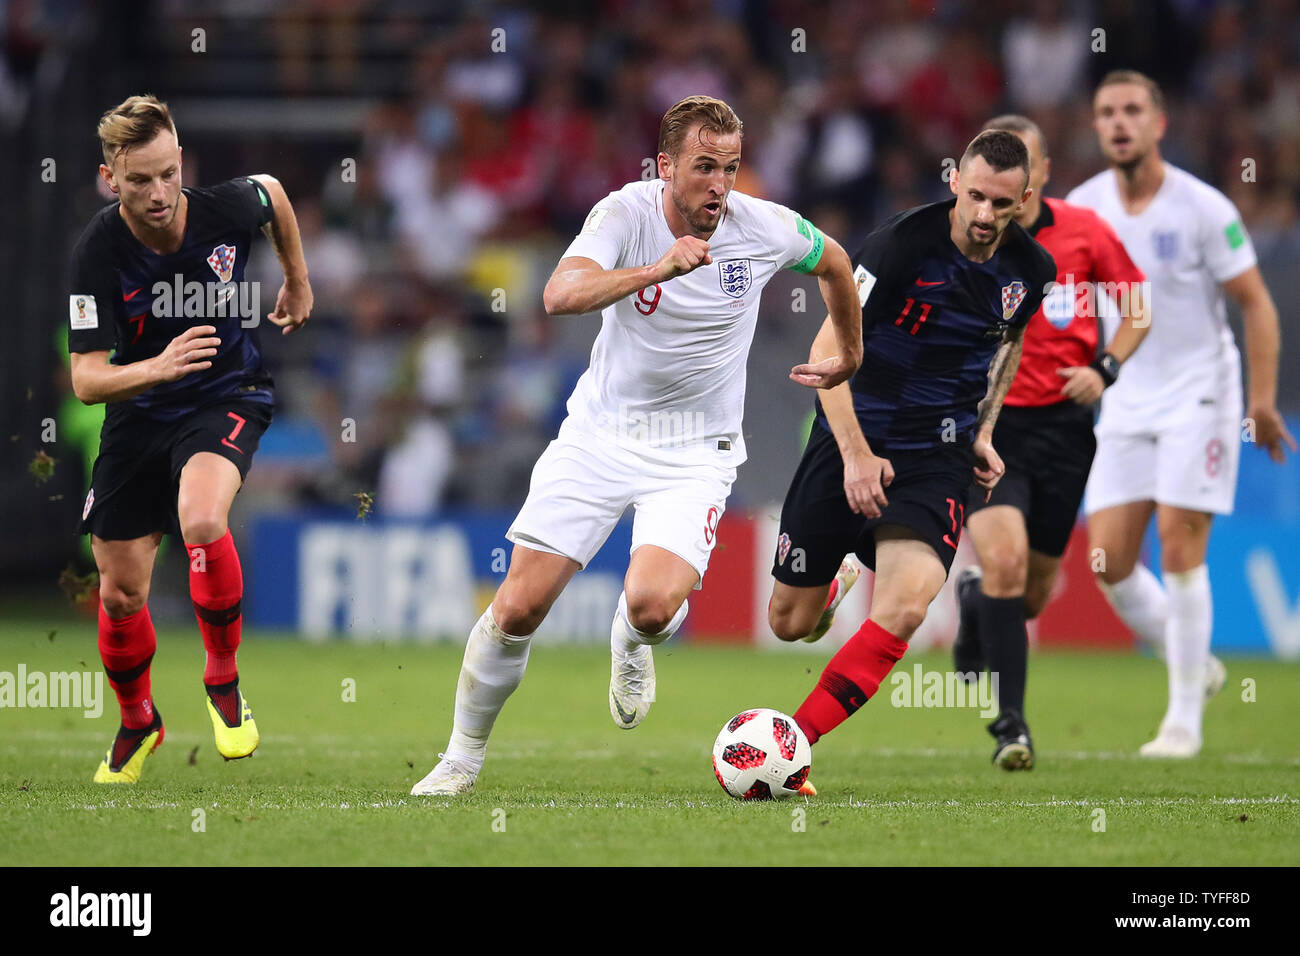 Marcelo Brozovic (R) of Croatia competes for the ball with Harry Kane (C) of England during the 2018 FIFA World Cup semi-final match at Luzhniki Stadium in Moscow, Russia on July 11, 2018. Croatia beat England 2-1 to qualify for the final. Photo by Chris Brunskill/UPI Stock Photo